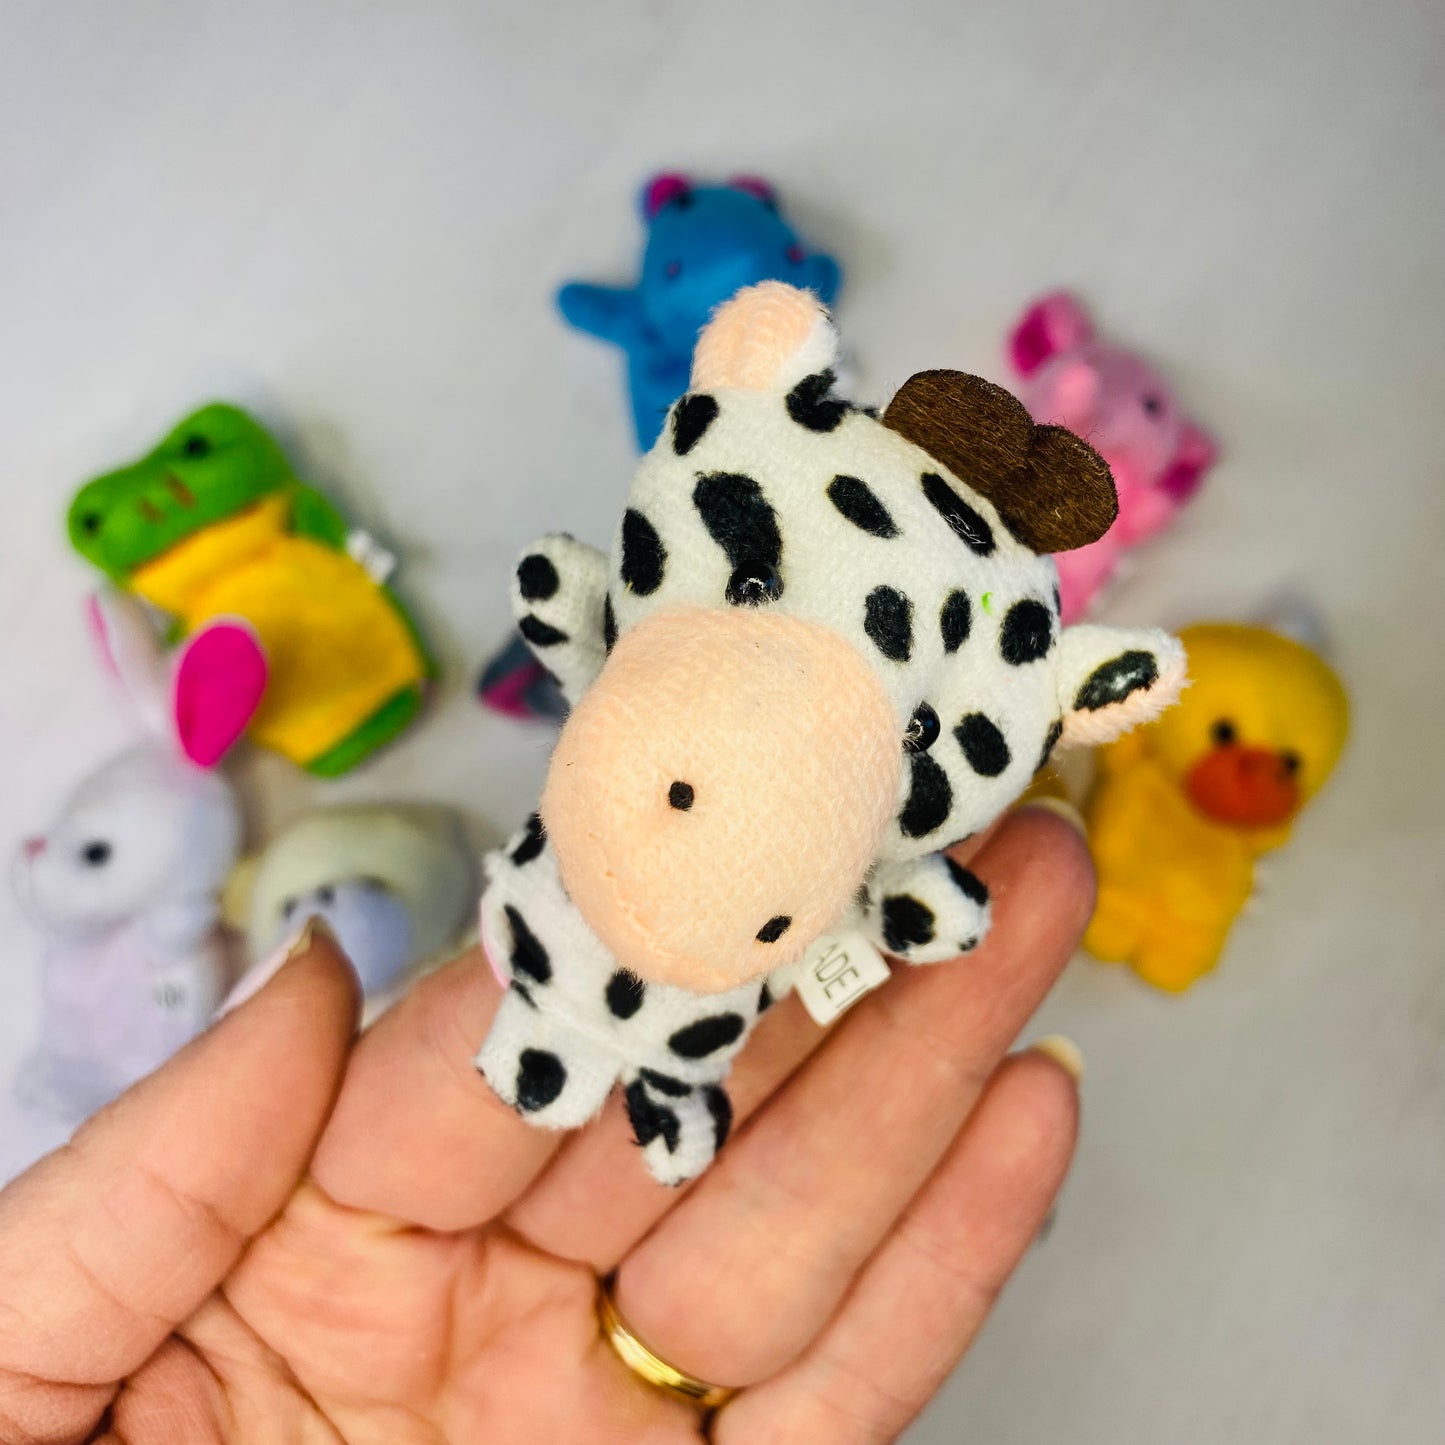 Adorable animal finger puppets for story telling fun! Pretend play toys for kids ages 3-5 years old. Educational toys to build your child's imagination and creativity. Fun Learn Grow Co.